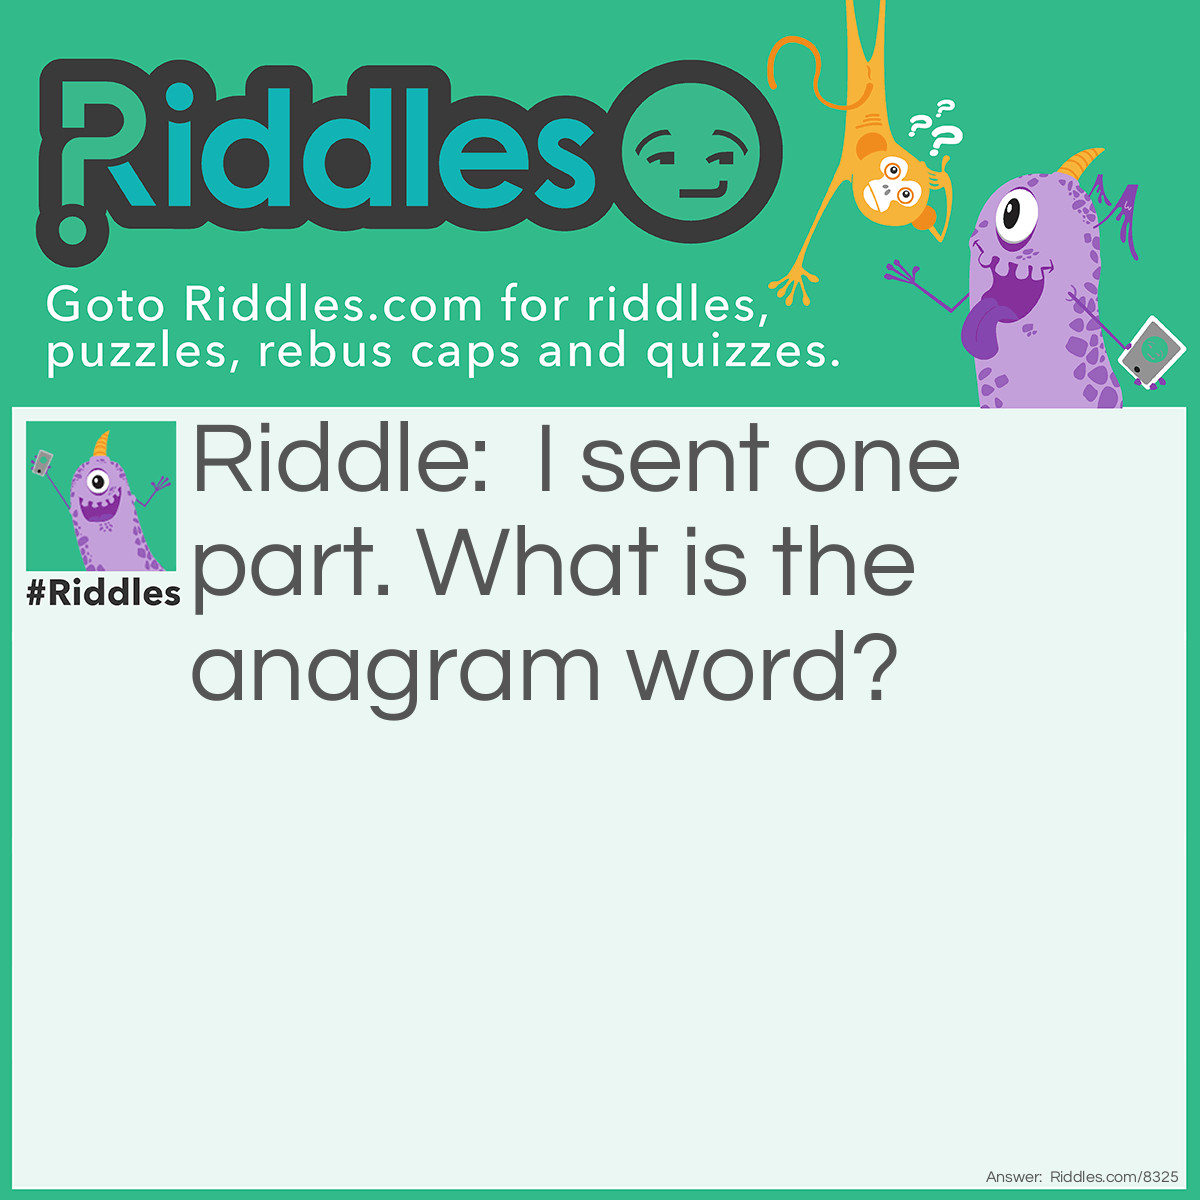 Riddle: I sent one part. What is the anagram word? Answer: Presentation.